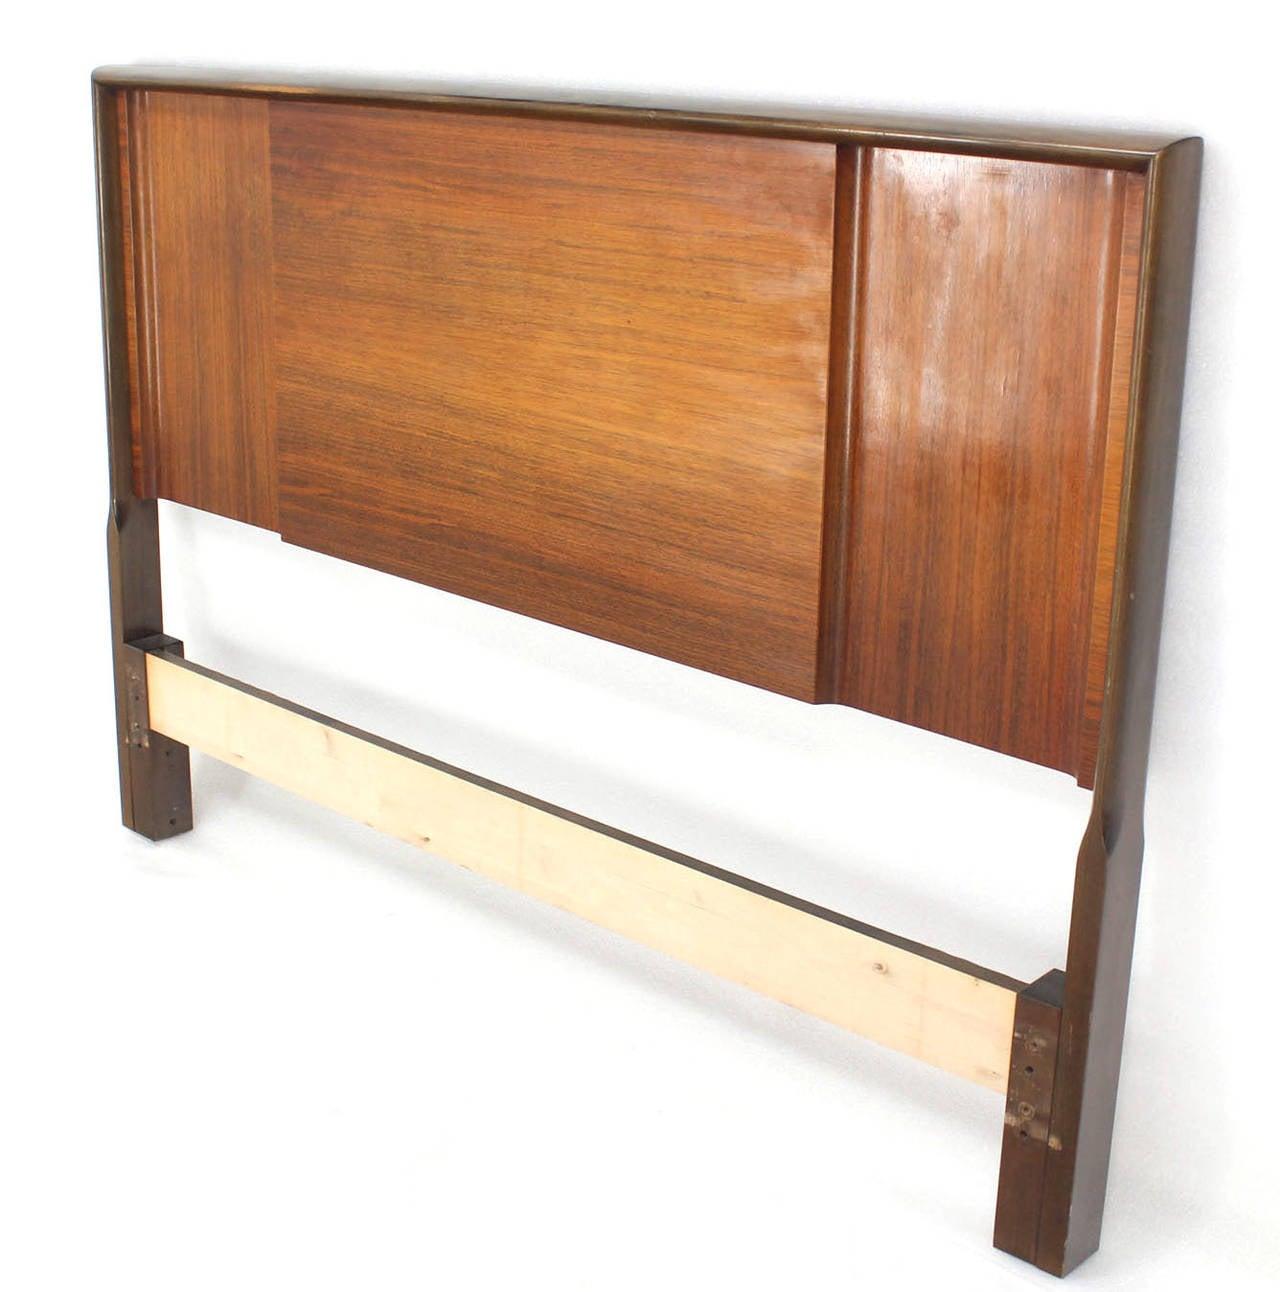 Lacquered Edmond Spence Made in Sweden Mid Century Modern Walnut Full Size Headboard MINT! For Sale